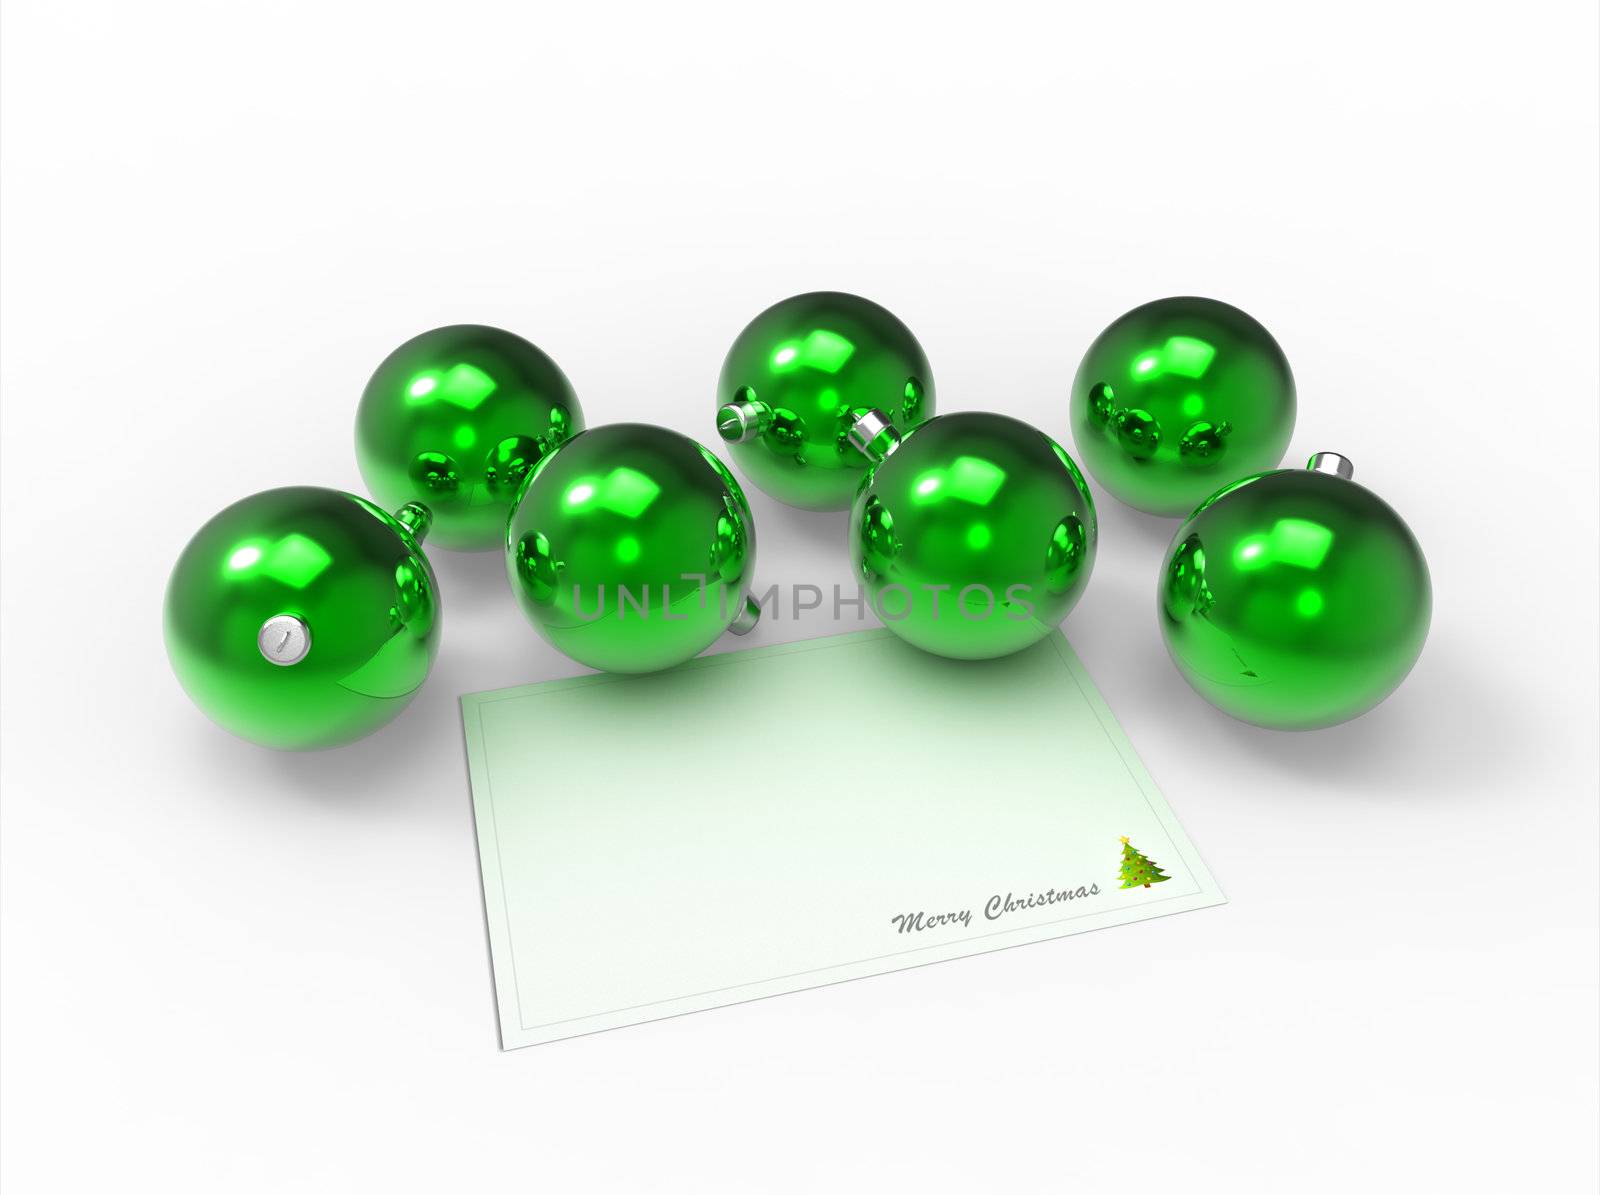 Christmas green baubles and white christmas card for the wishes by vermicule